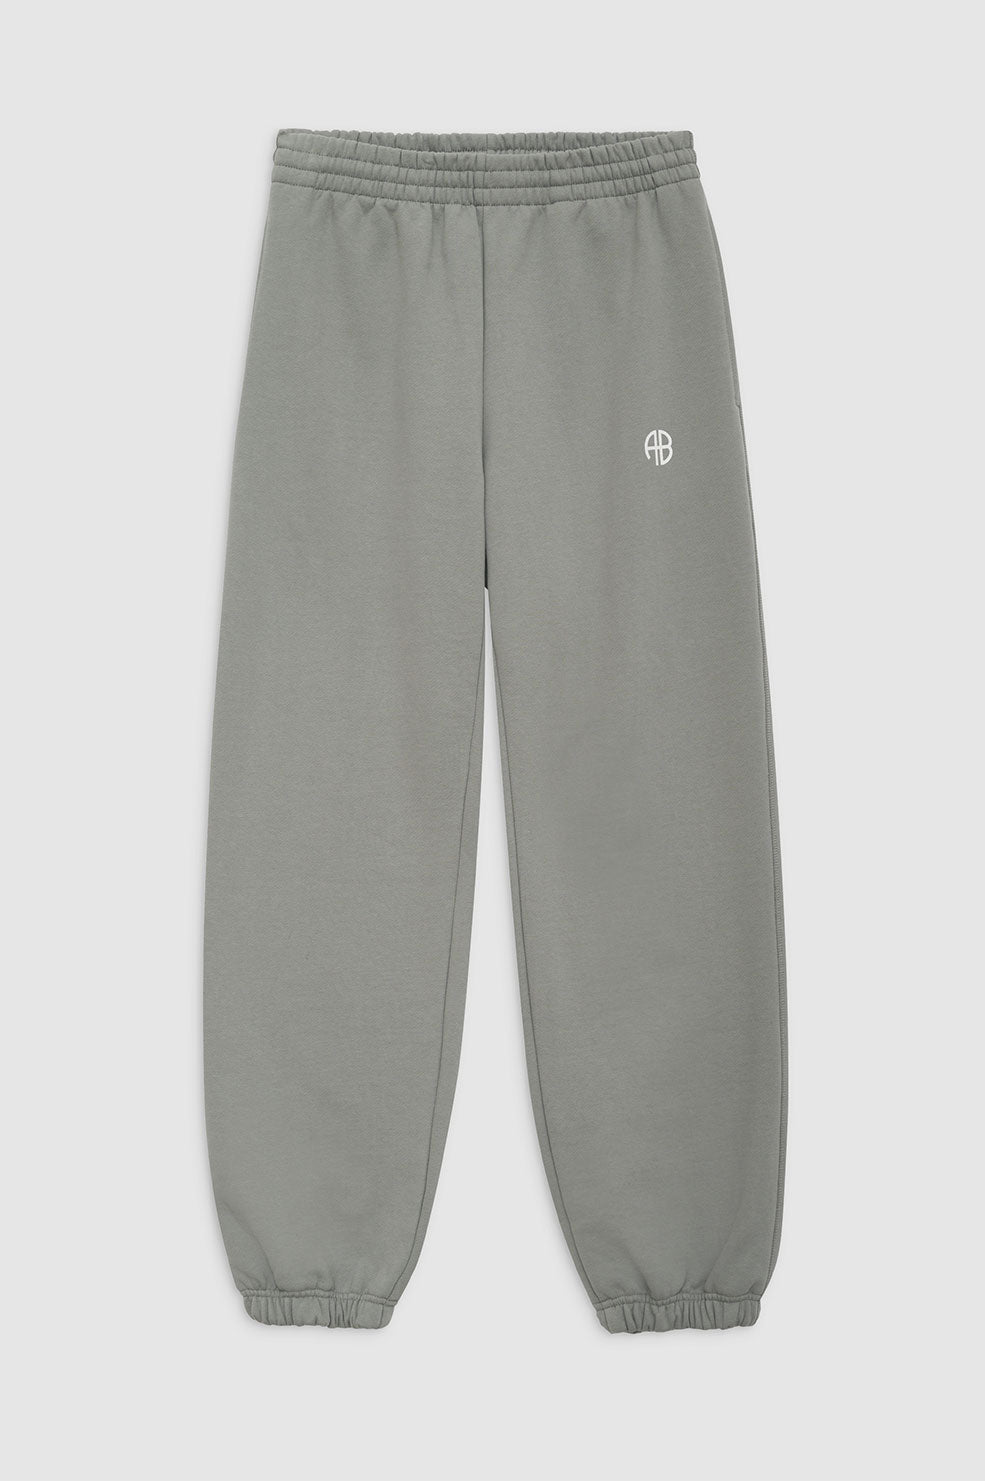 ANINE BING Karter Jogger - Storm Grey - Front View